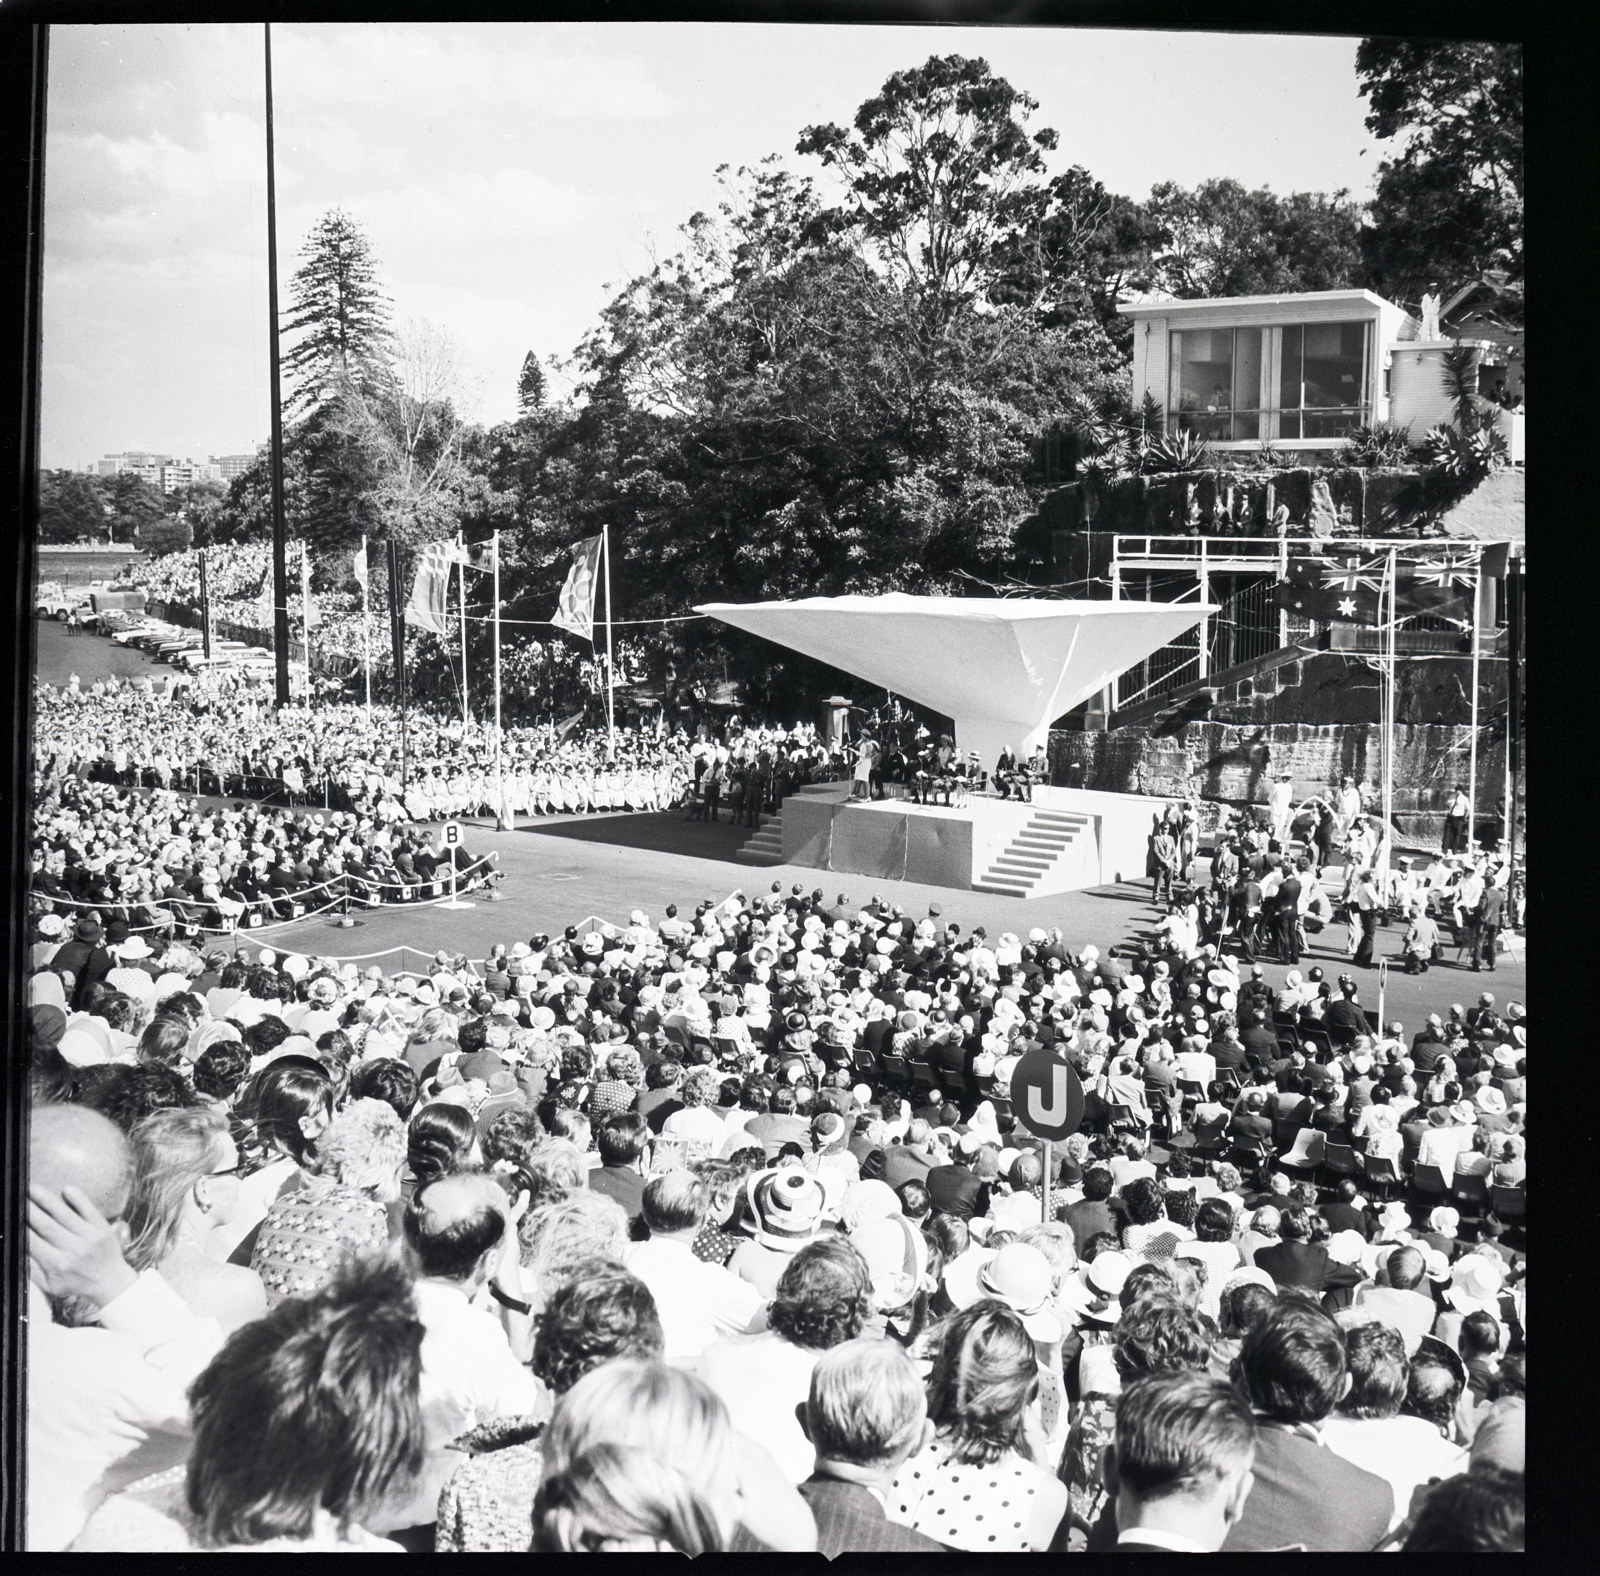 HM the Queen delivering Her speech at the opening of the Opera House. The official party seated on a dais with inverted roof, set up in the forecourt before the Tarpeian Steps, with a temporary works viewing pavilion behind. October 20th 1973.